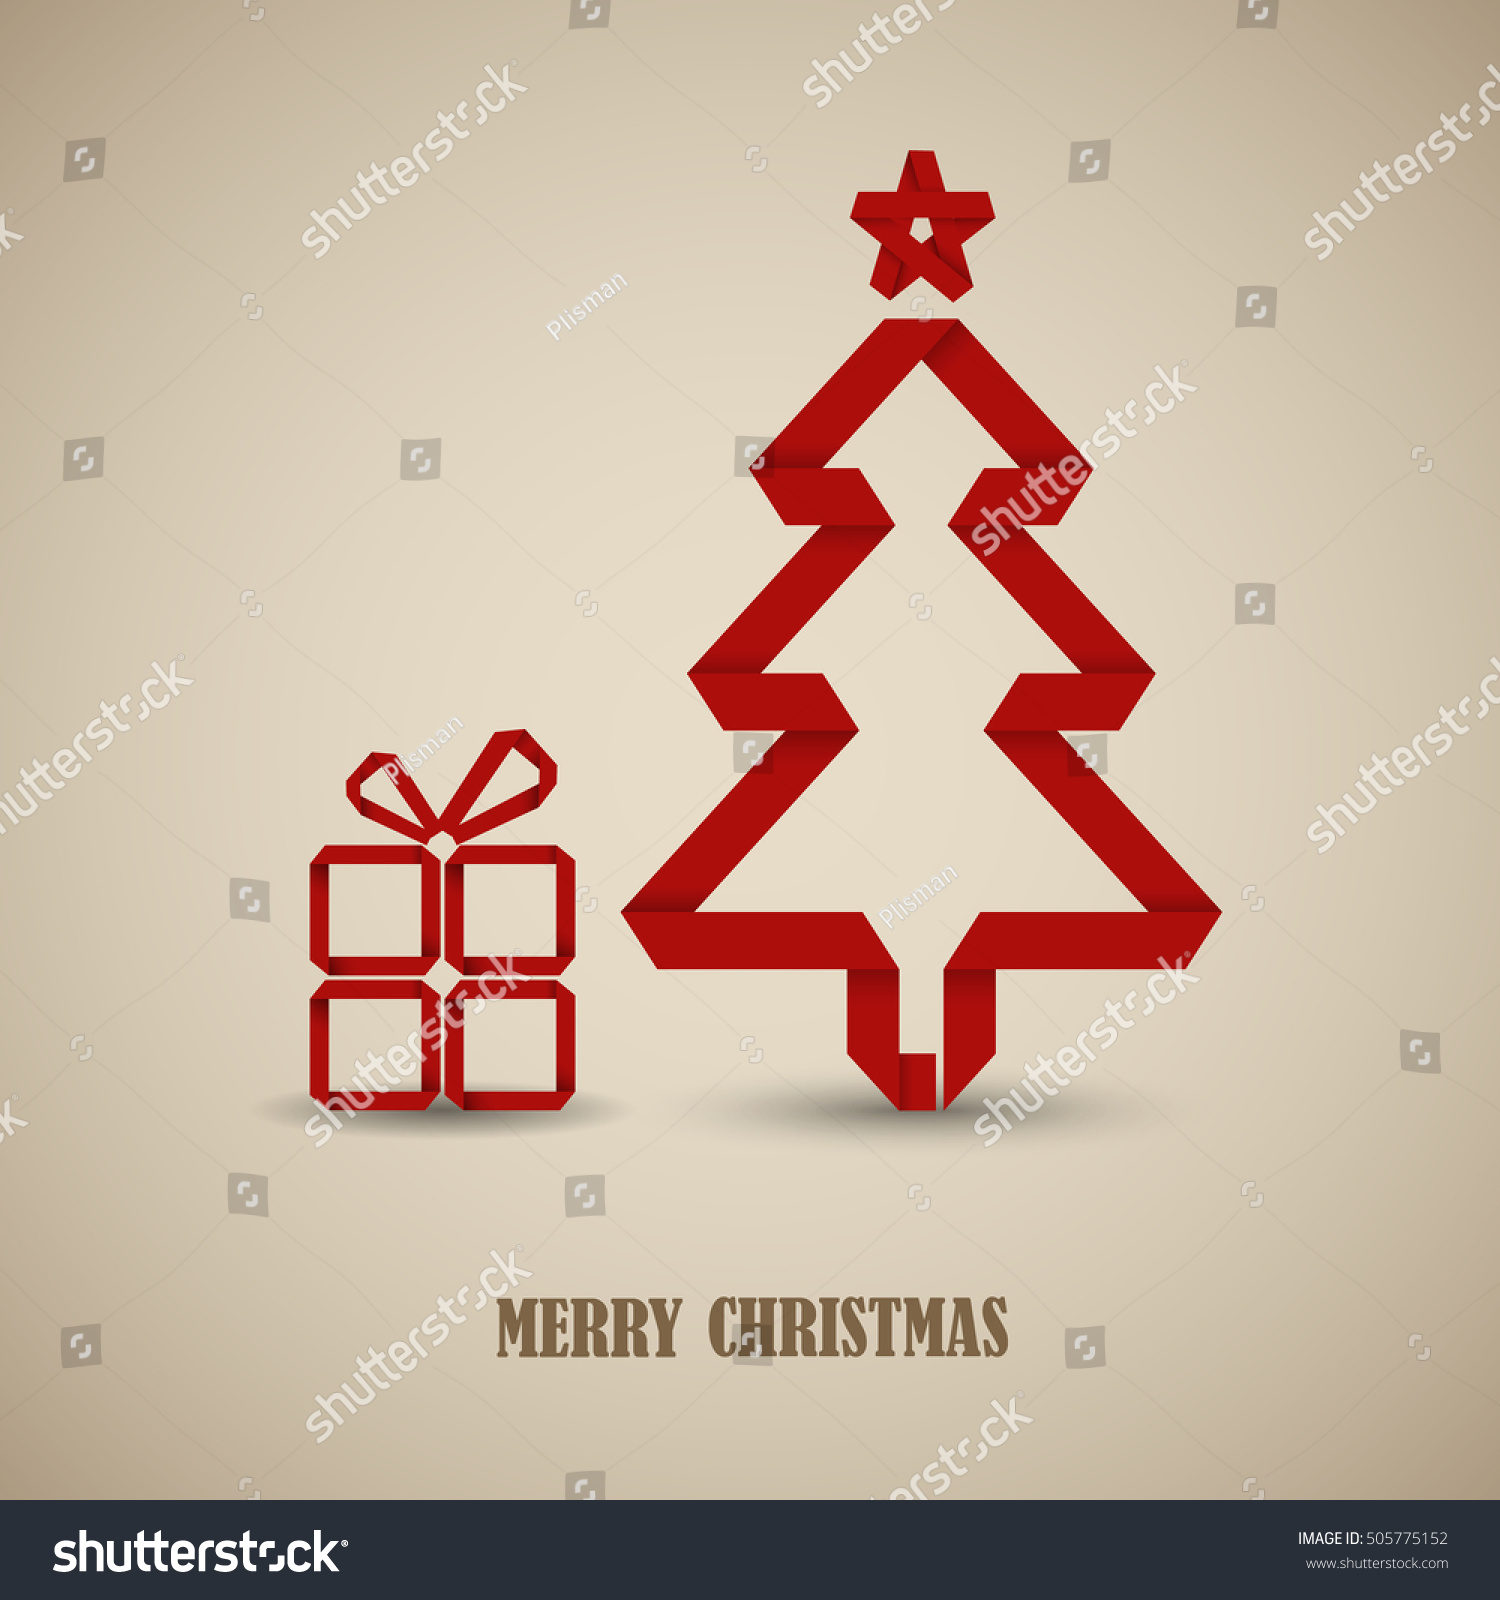 Christmas card with folded red paper tree template